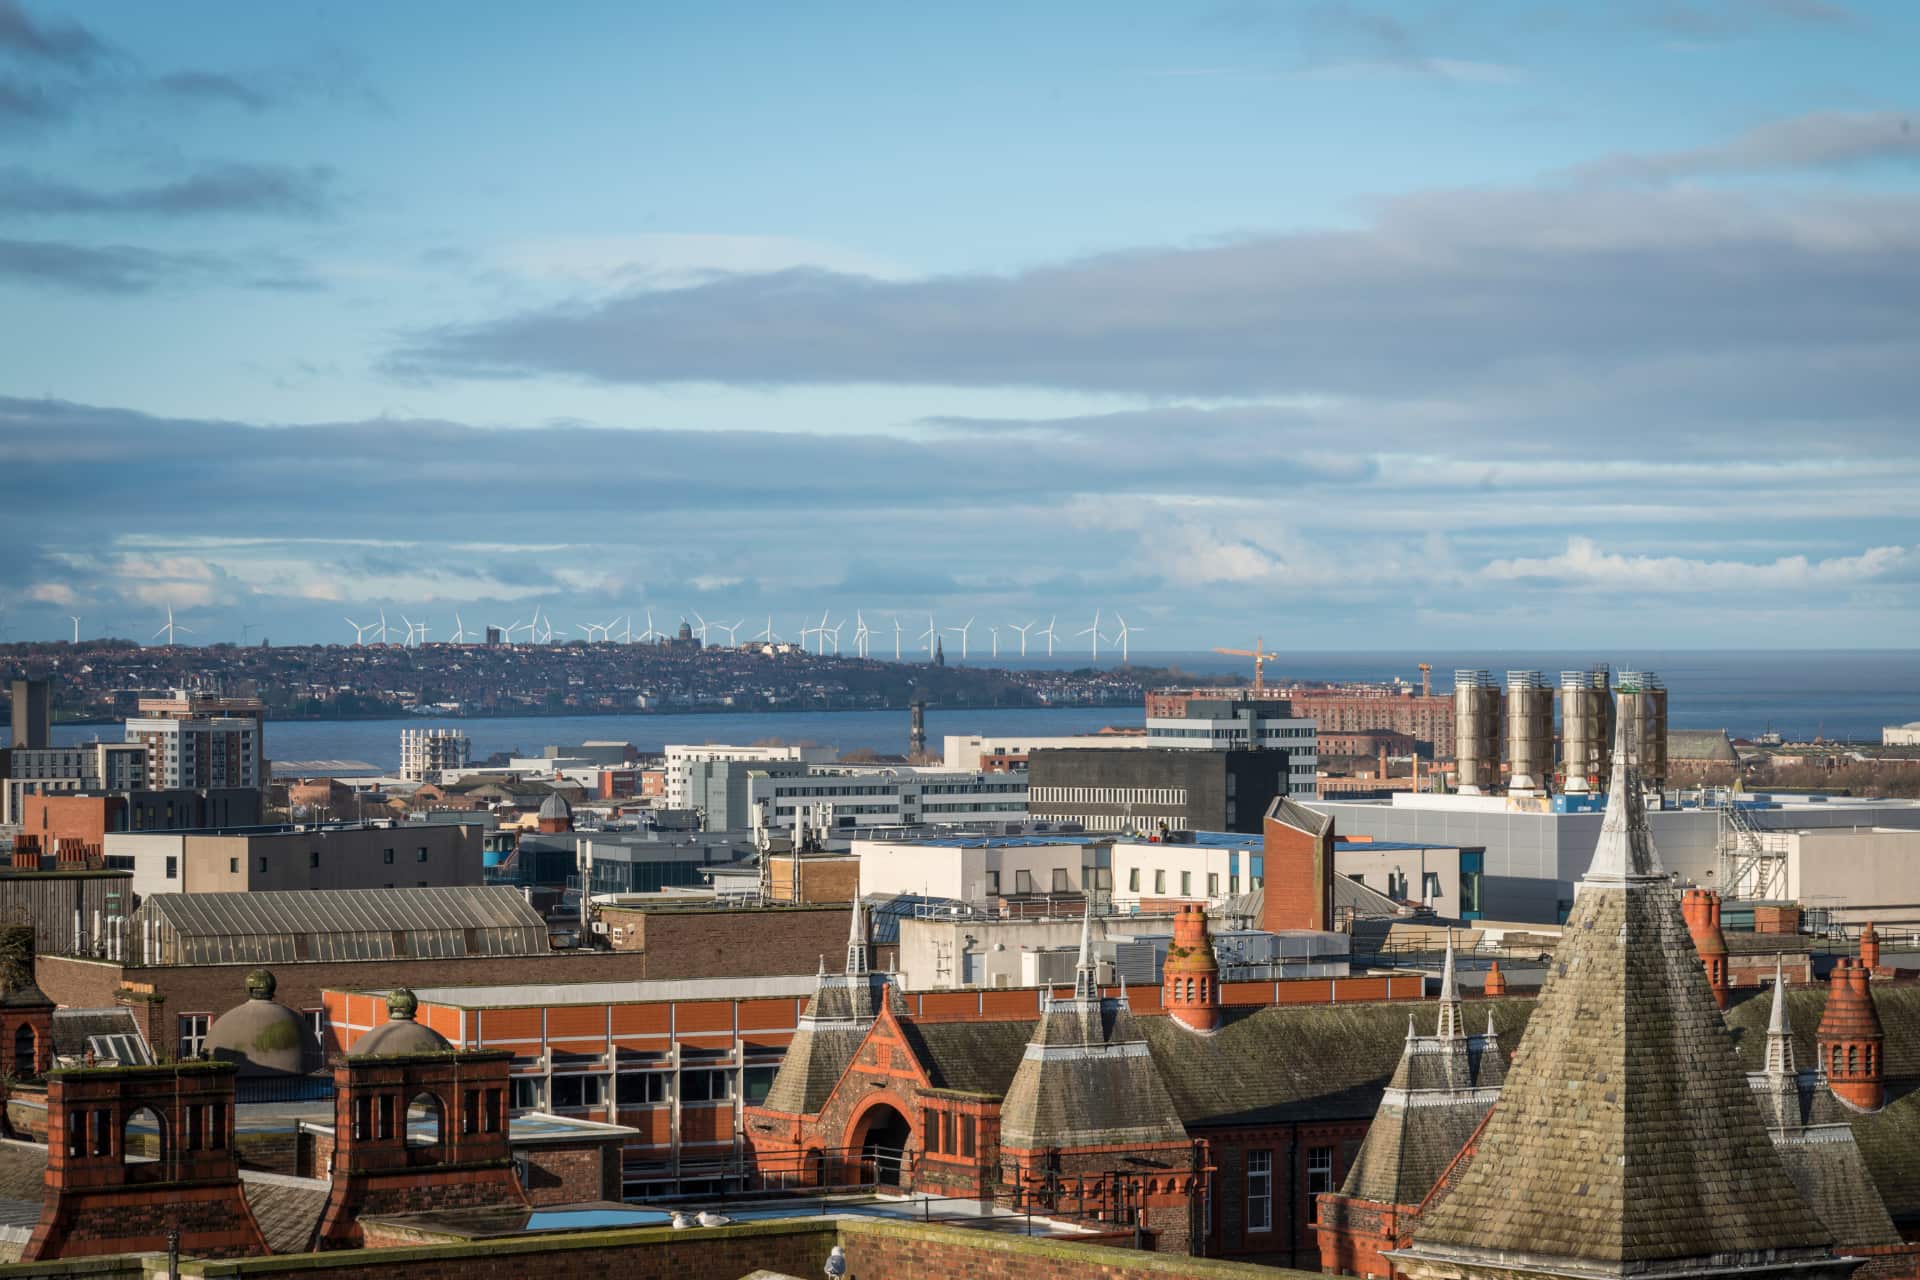 The rooftops of the University campus are in the foreground, in the background the Mersey river and wind turbines are visible.